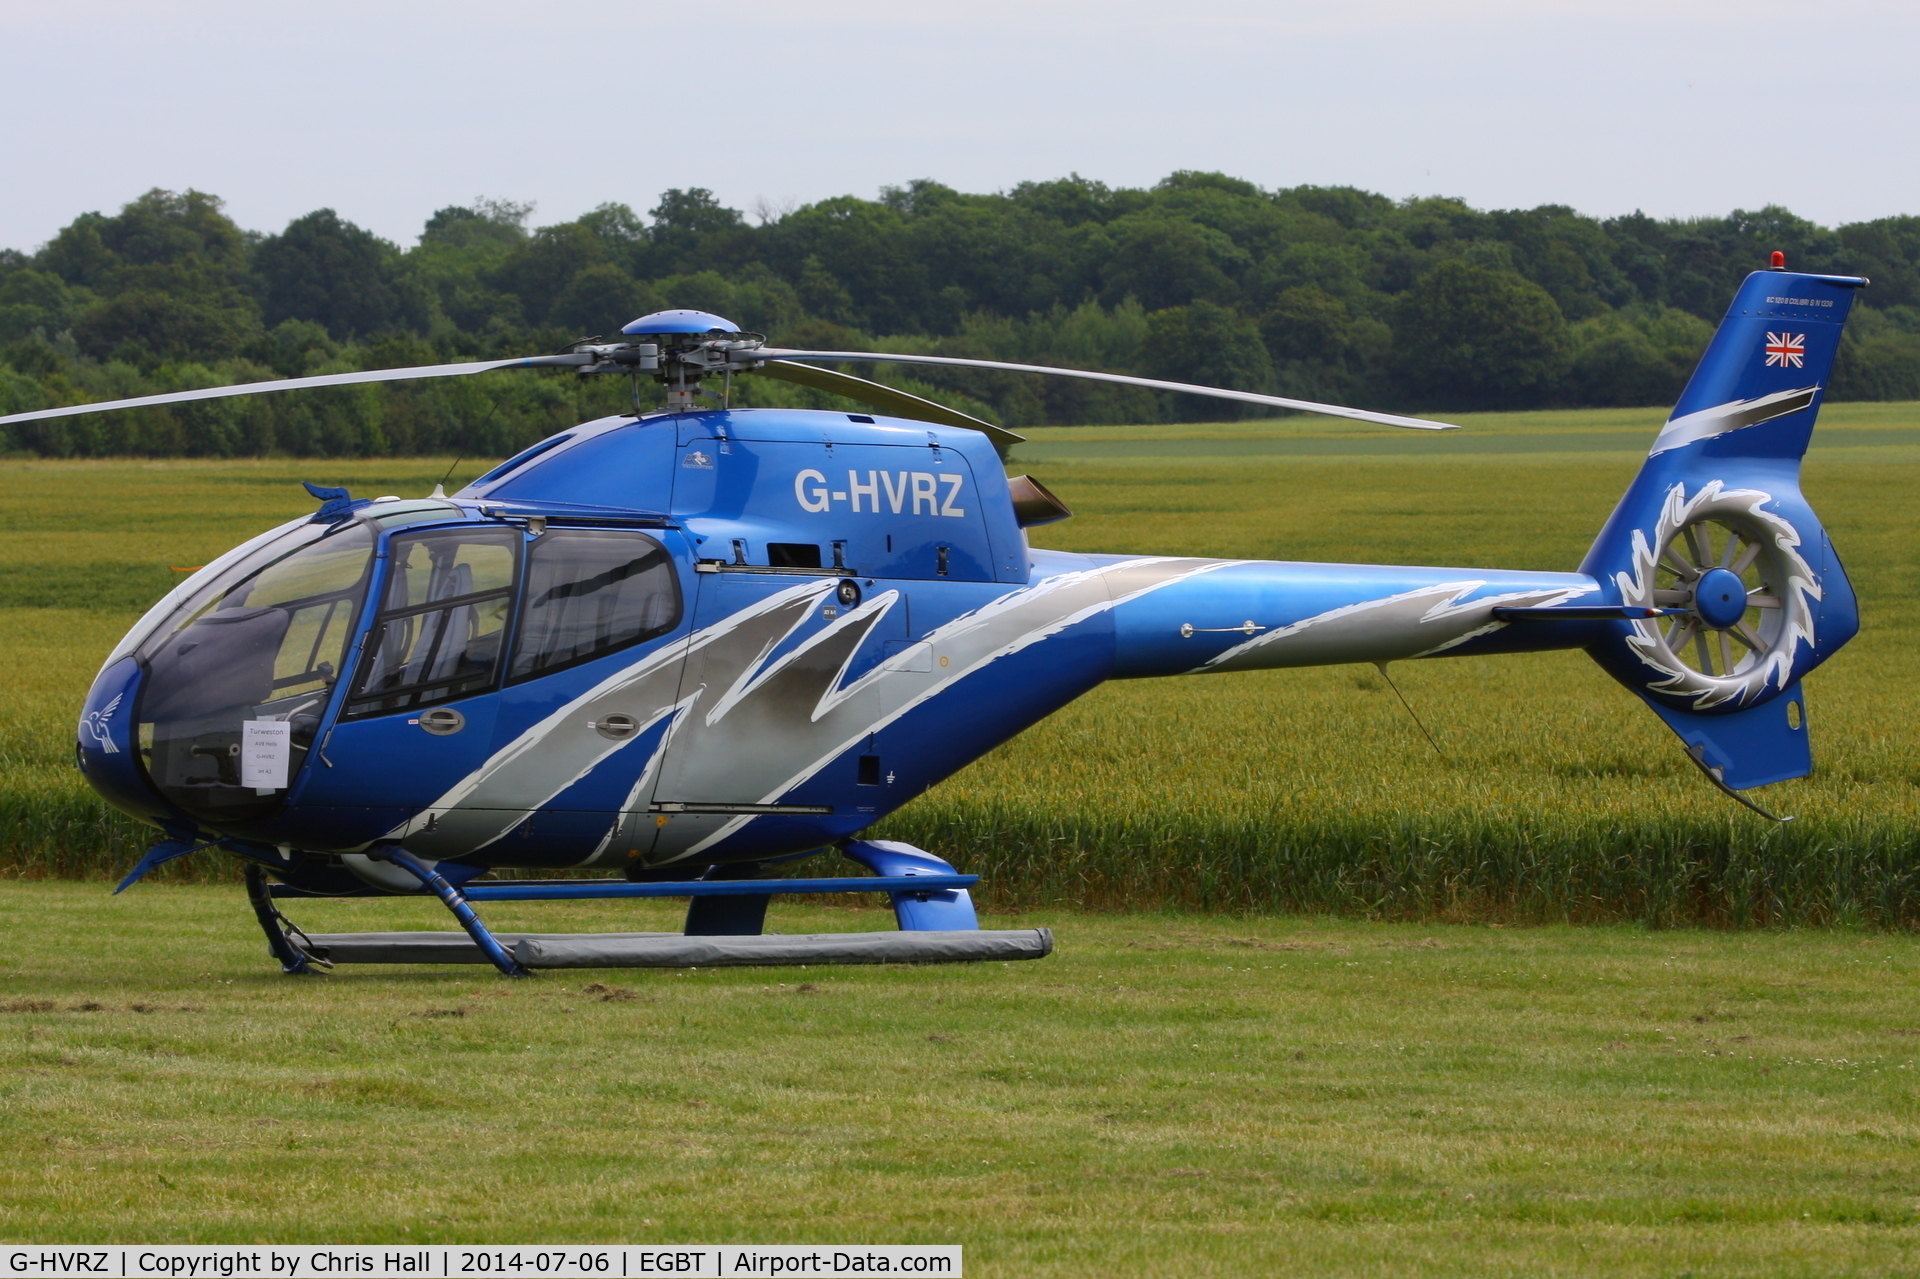 G-HVRZ, 2003 Eurocopter EC-120B Colibri C/N 1338, ferrying race fans to the British F1 Grand Prix at Silverstone